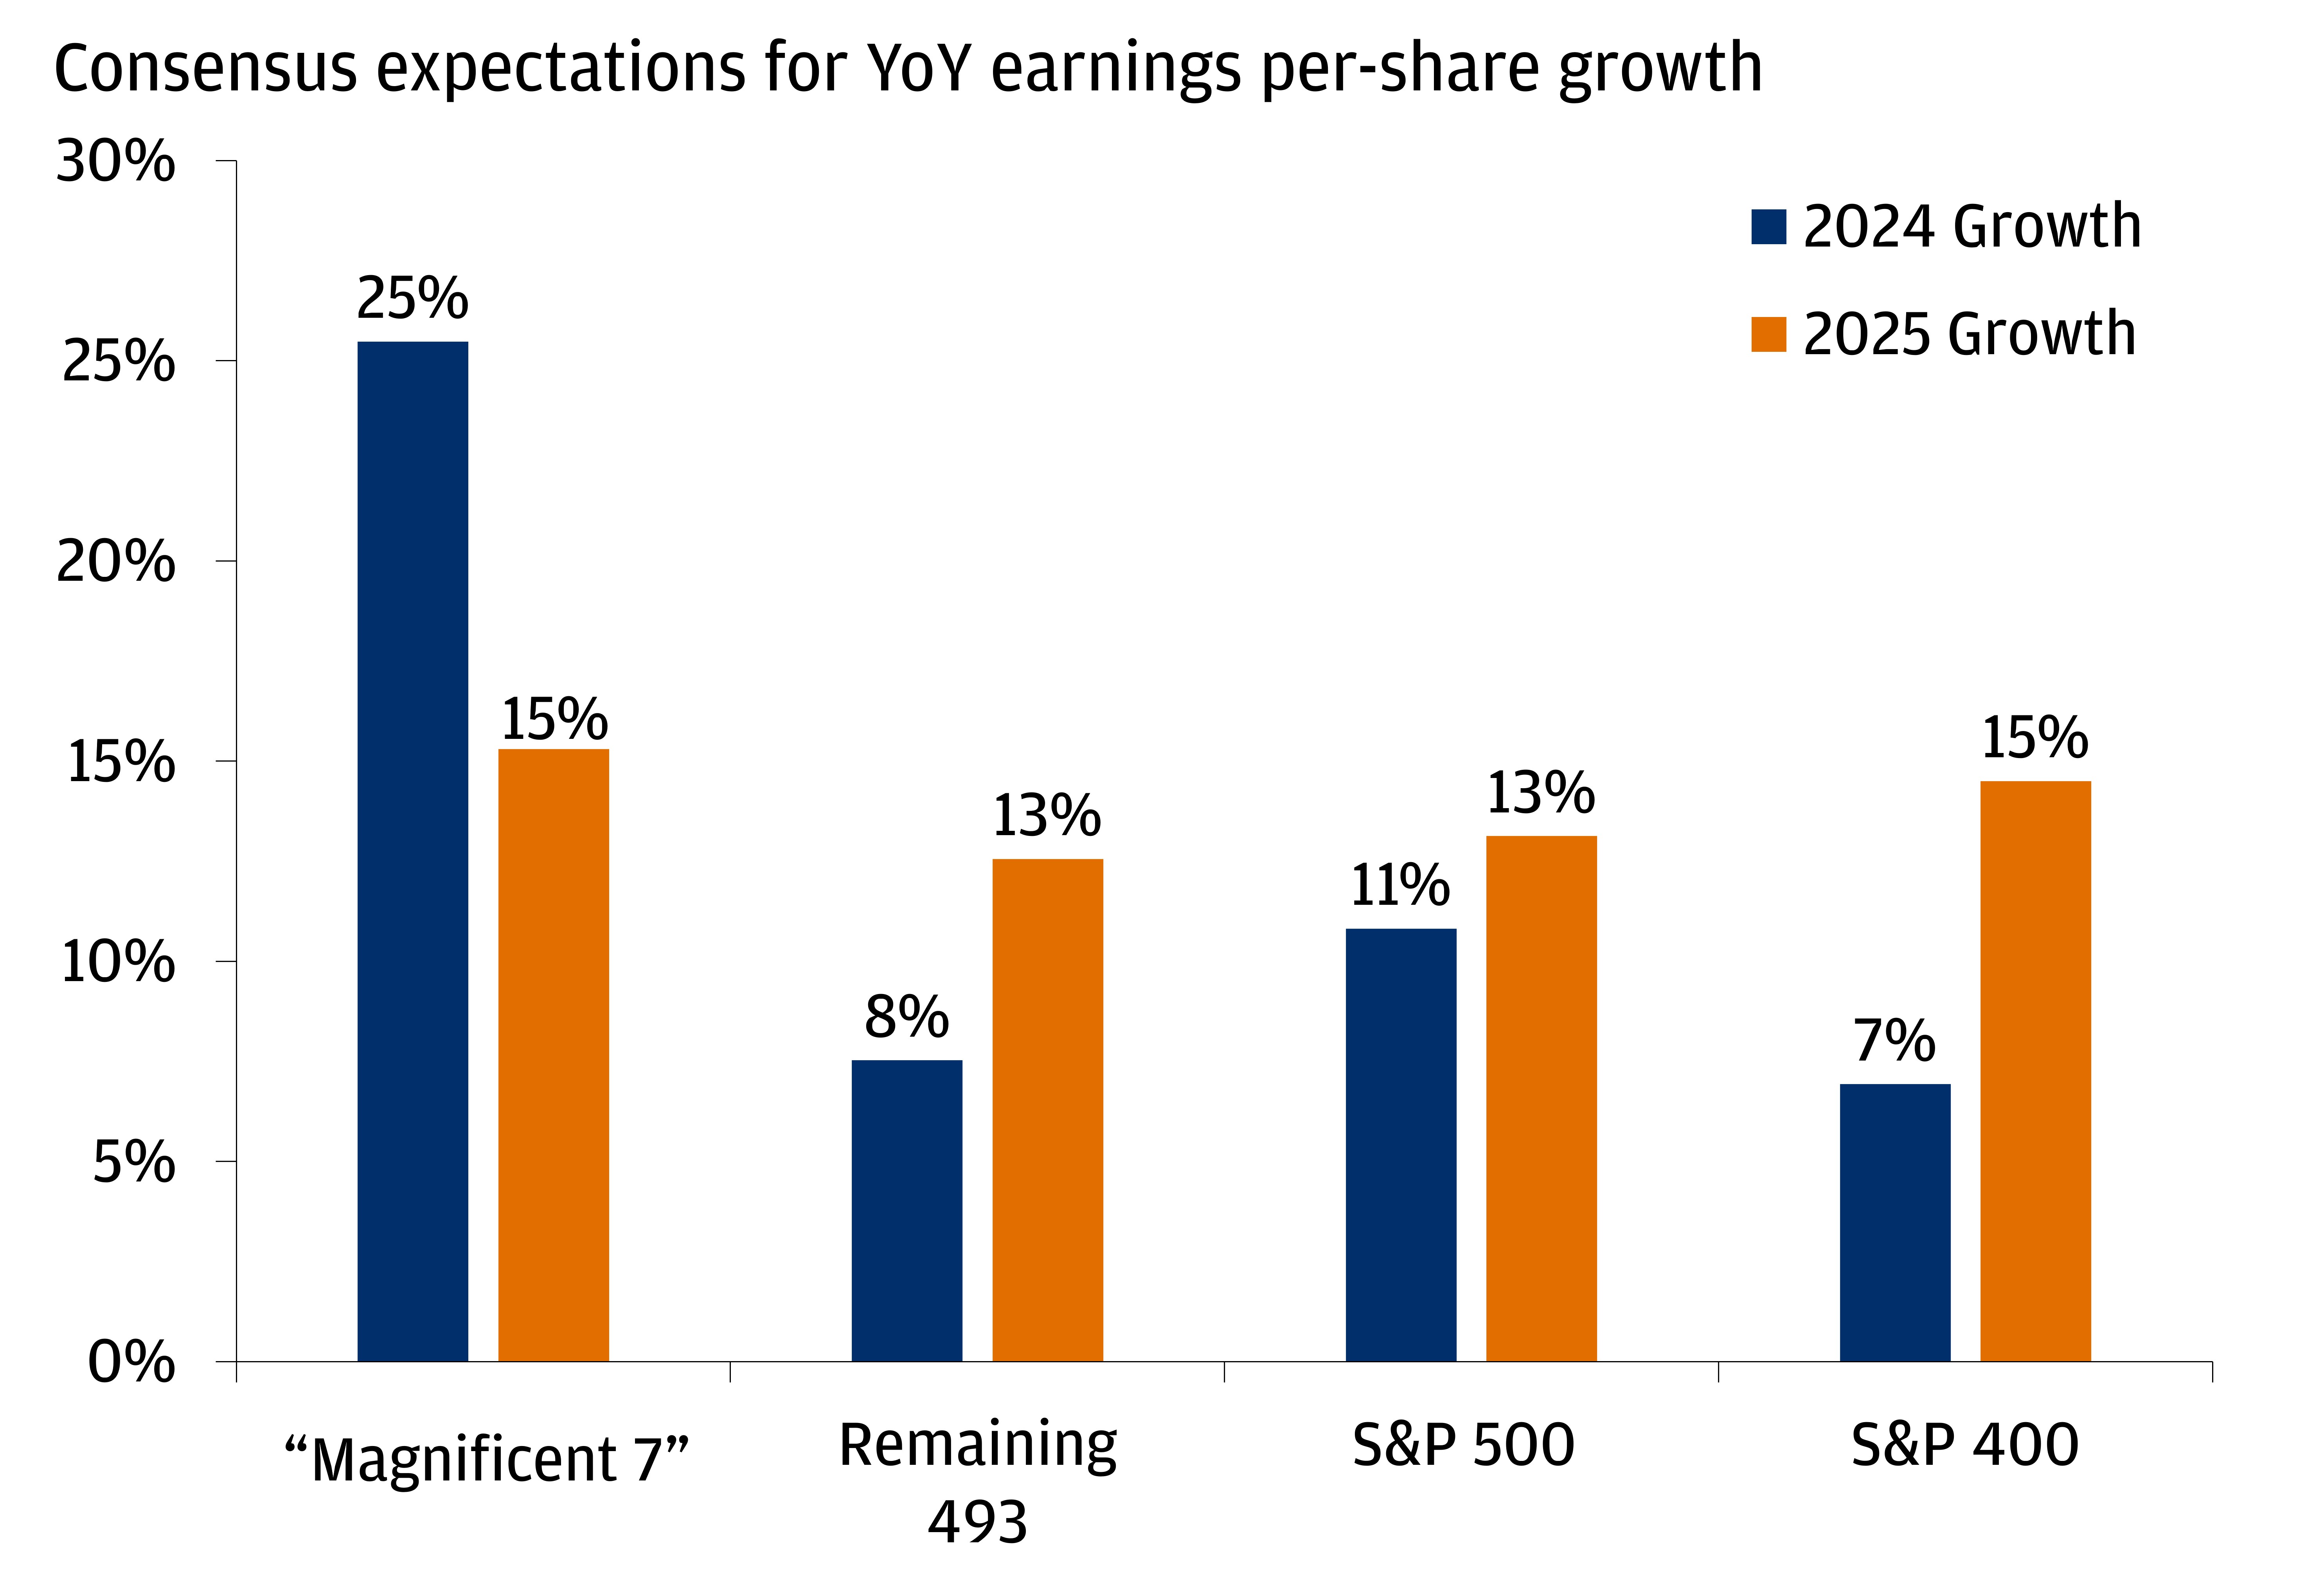 This chart shows YoY earnings-per-share growth for the Mag-7, remaining 493, S&P 500 and S&P 400 for 2024 and 2025.